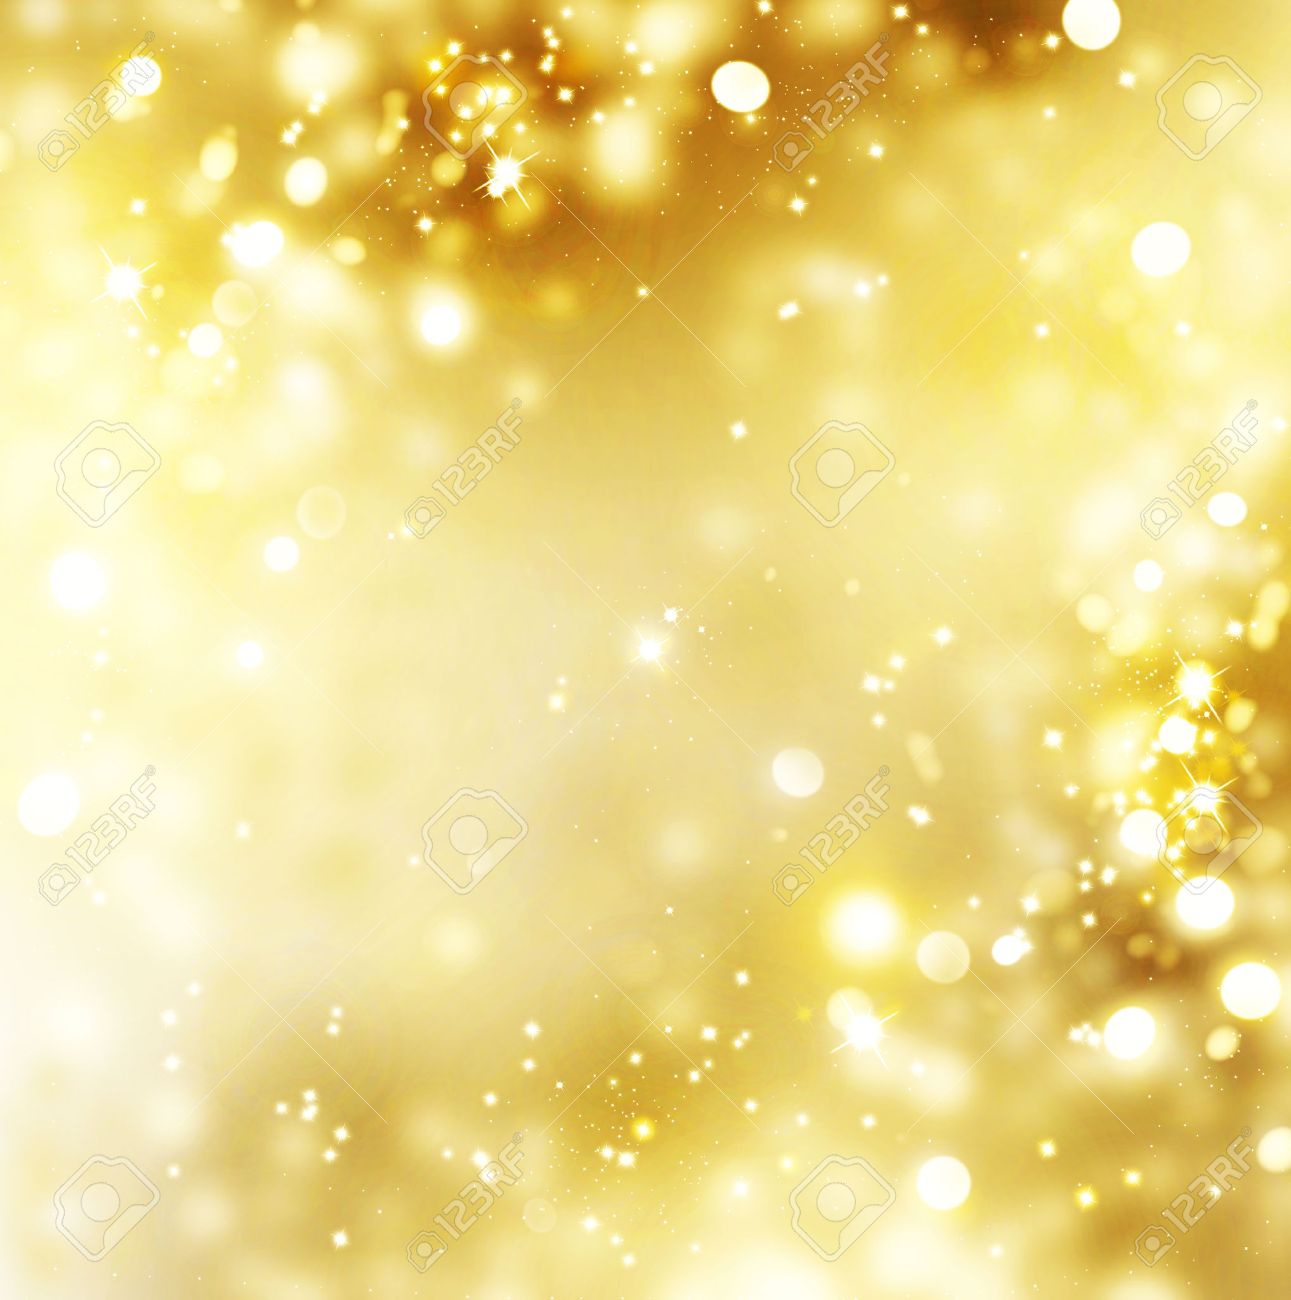 Christmas Gold Background Golden Holiday Glowing Stock